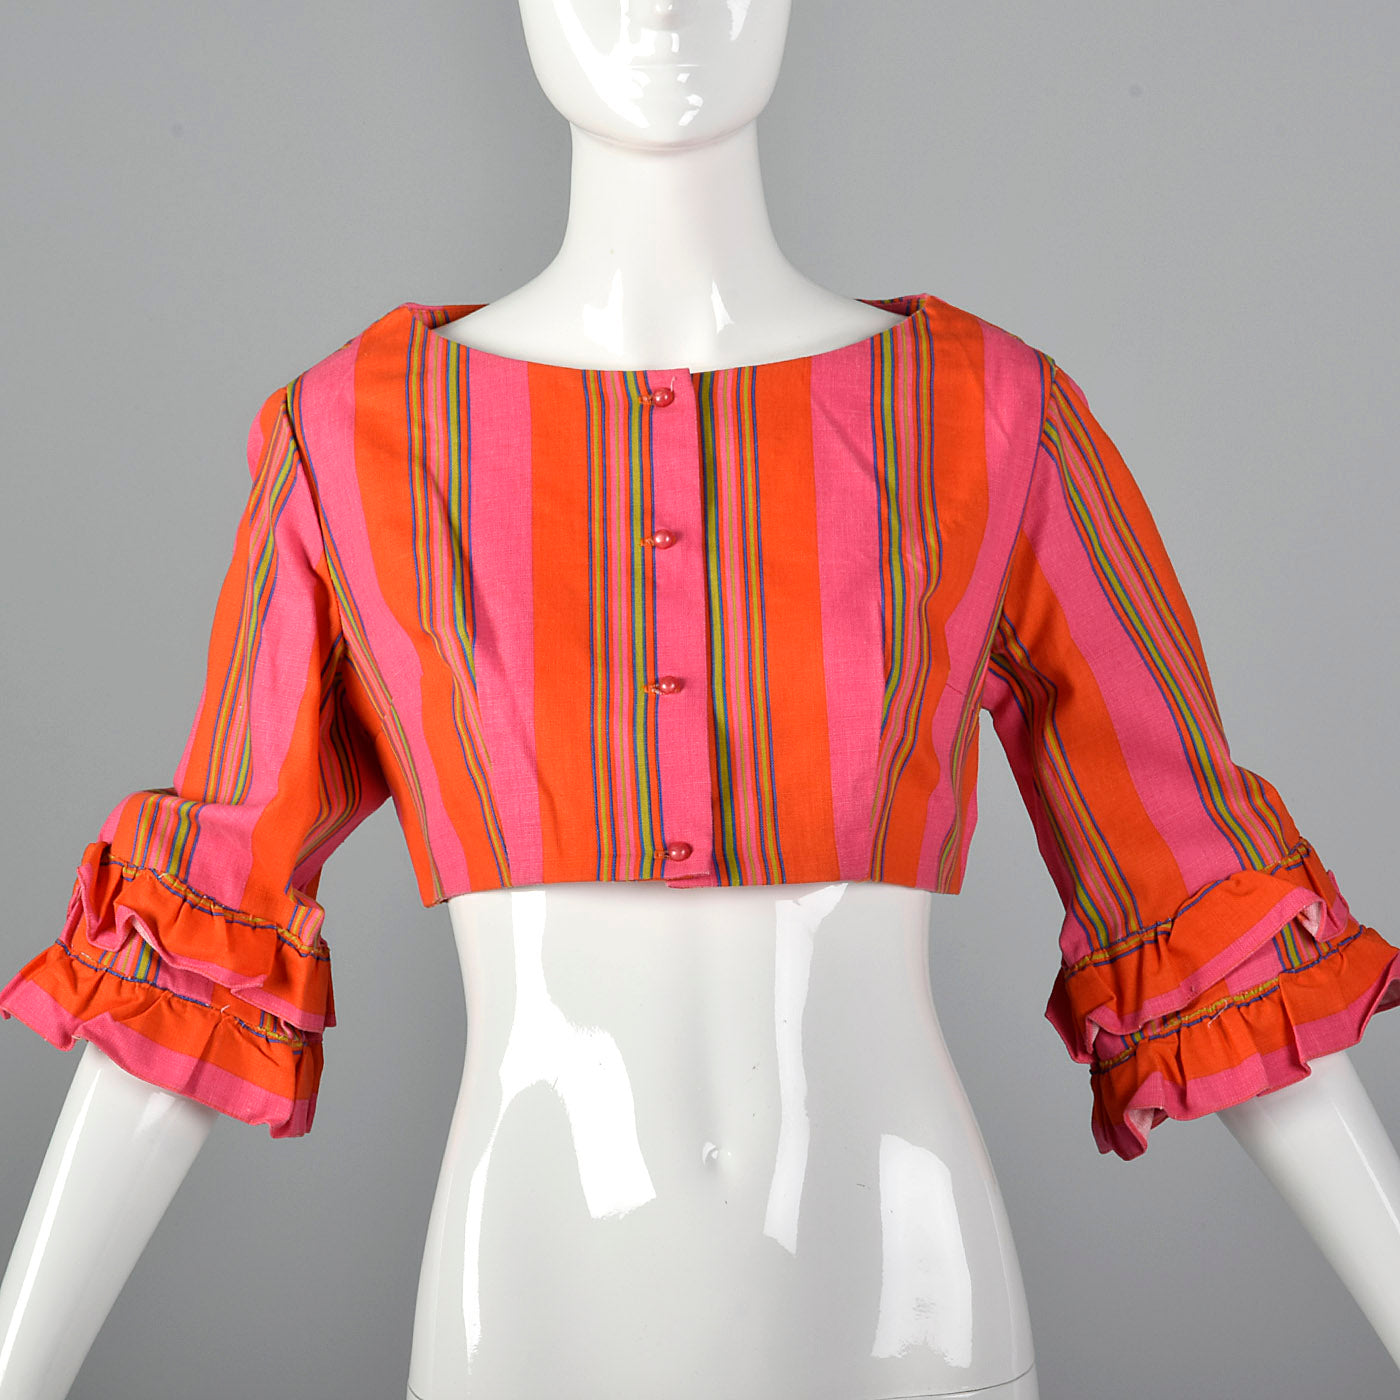 1970s Stripe Crop Top with Ruffle Sleeves